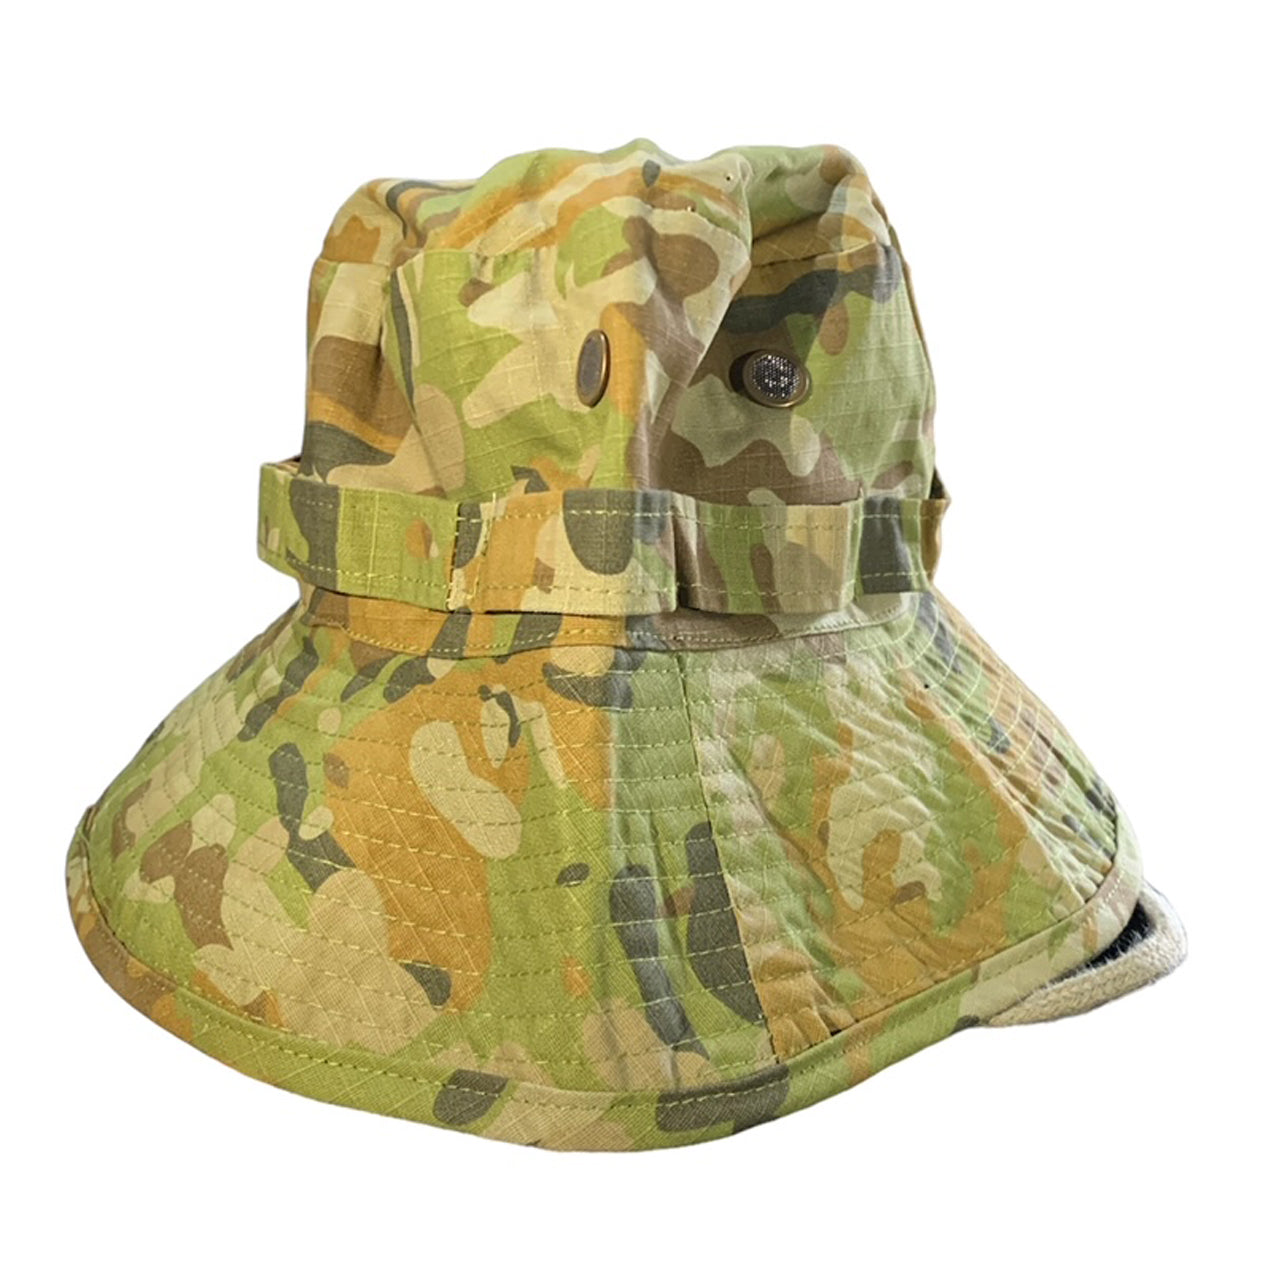 Constructed of airy canvas fabric, Giggle Hat AMCU boasts a rugged drawstring with cord, a double-layer brim, and an updated style featuring a broader brim. Weighing 80g. It's lightweight yet strong and designed for all-weather adventure wear. Look good and feel confident with Giggle Hat AMCU. www.moralepatches.com.au